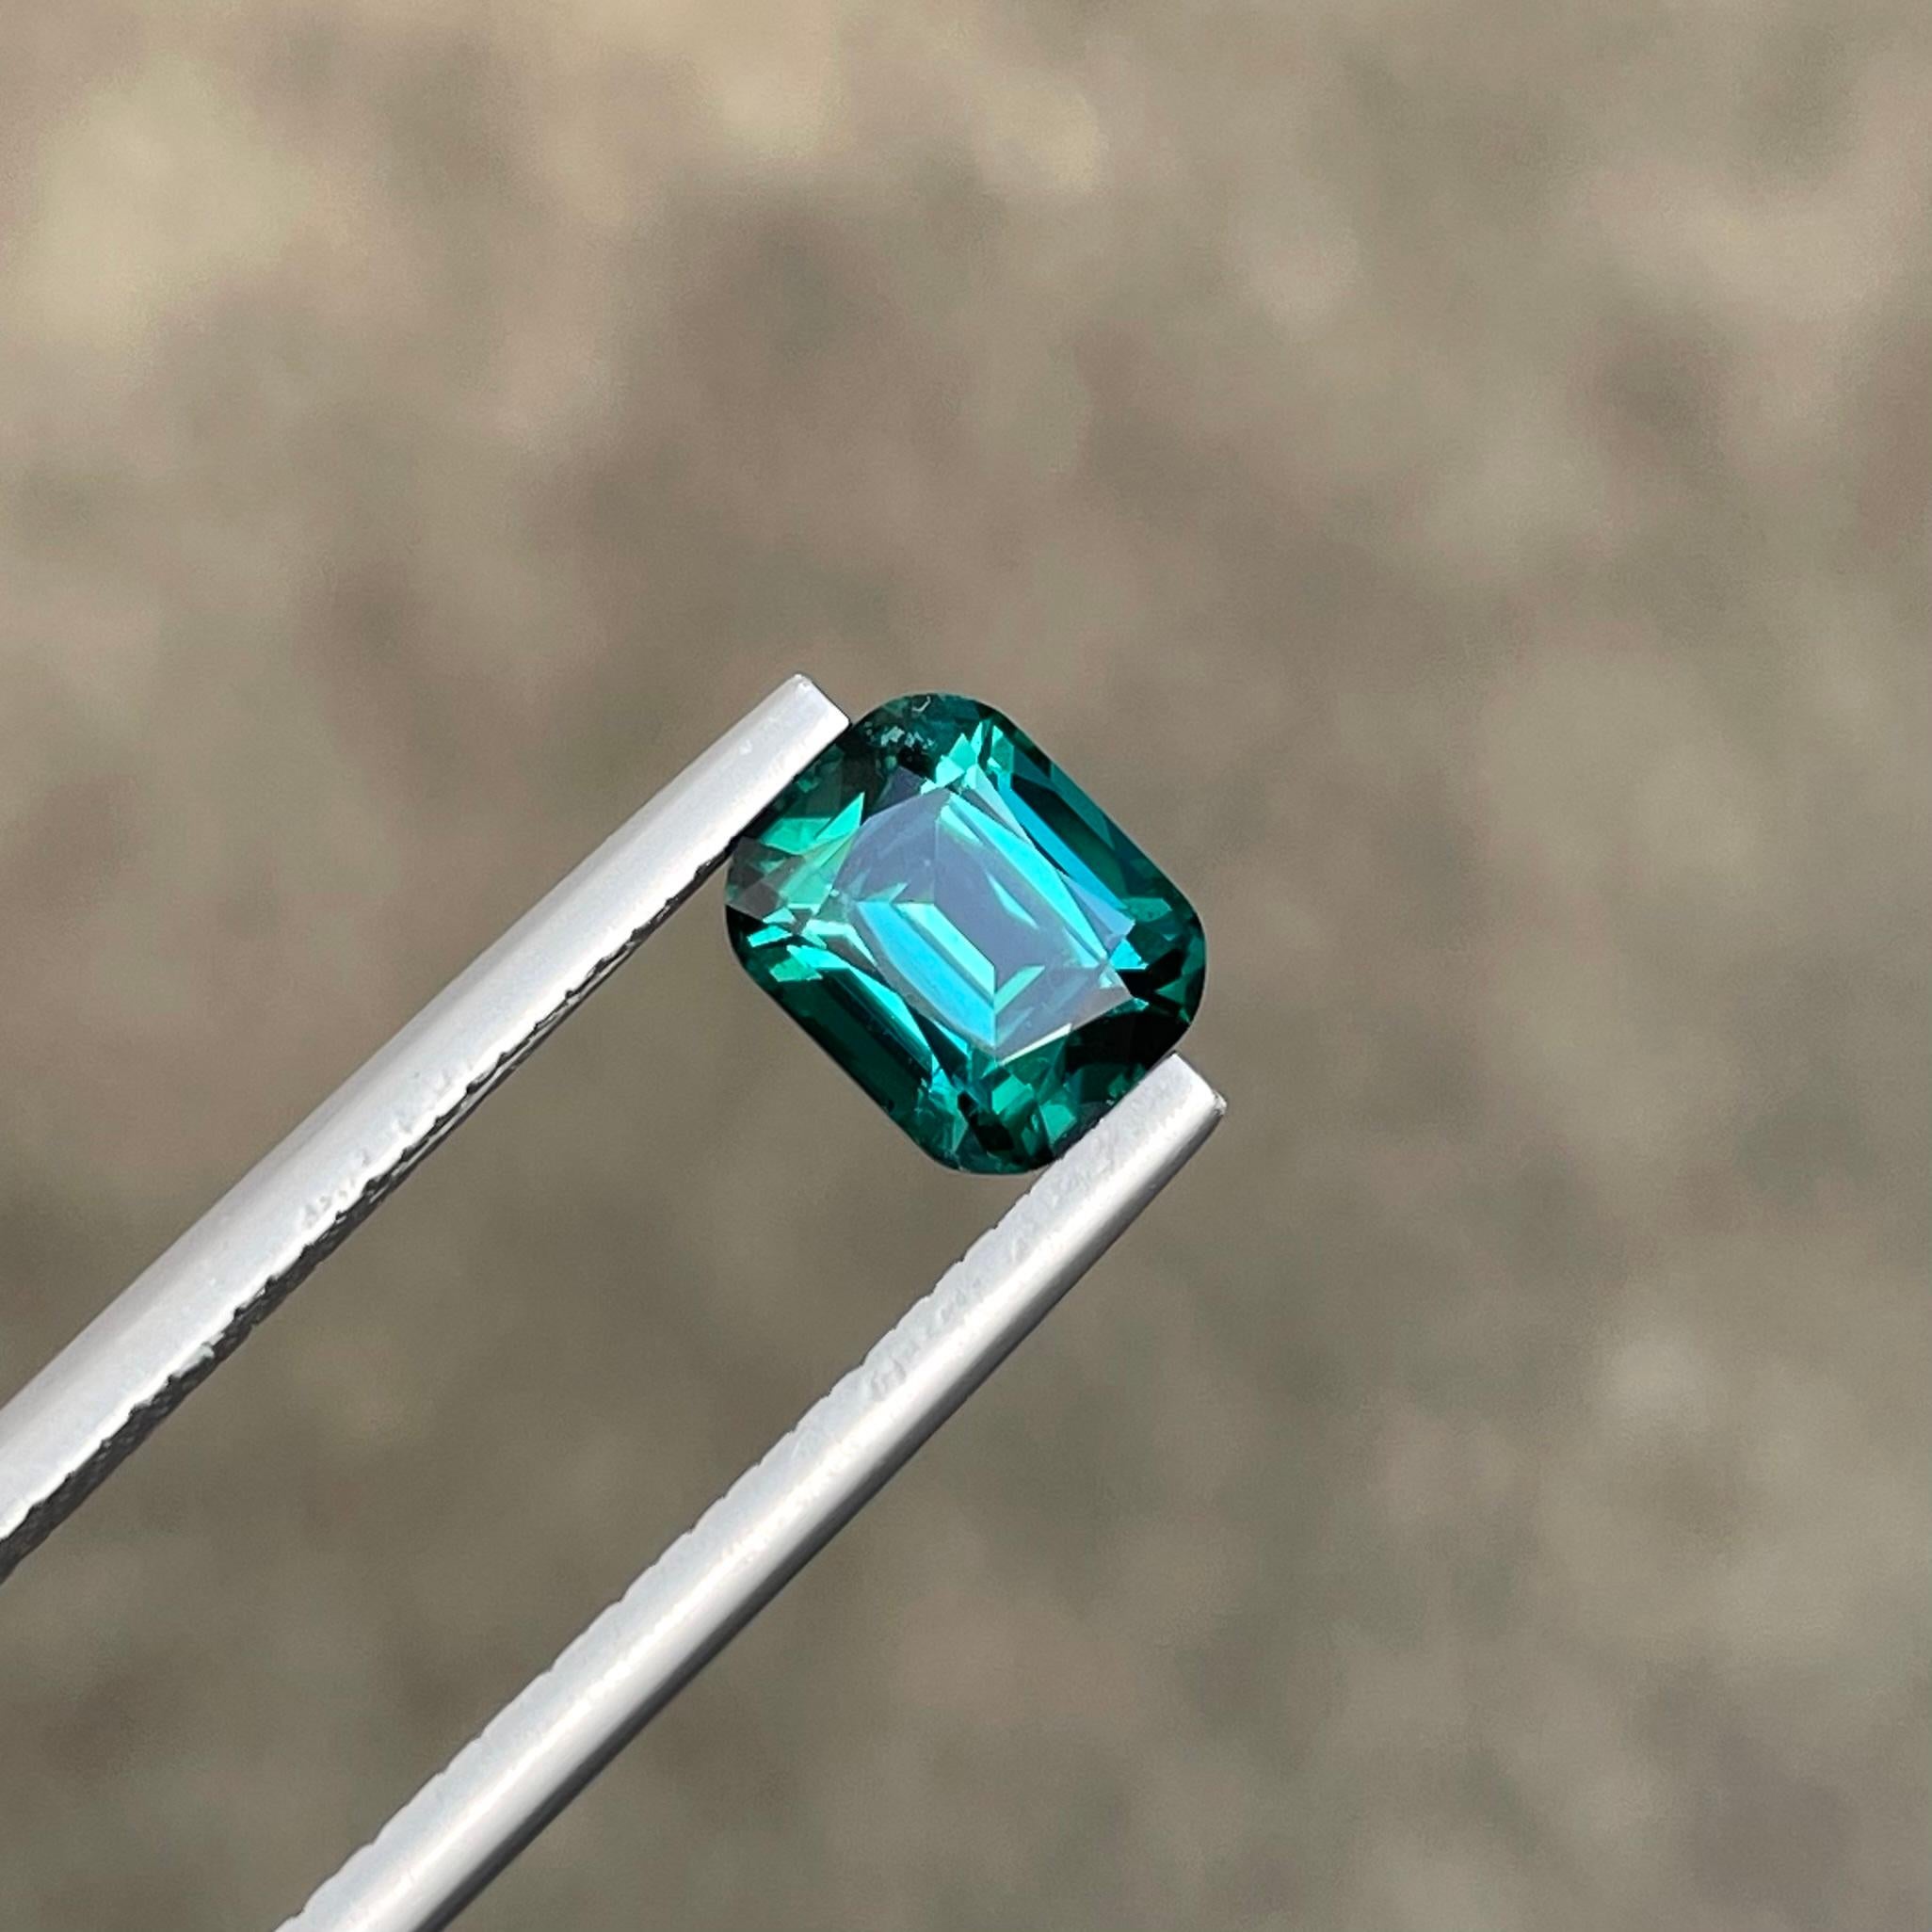 Weight 1.70 carats 
Dimensions 7.4 x 6.0 x 4.9 mm
Treatment None 
Origin Afghanistan 
Clarity VVS (Very, Very Slightly Included)
Shape Cushion
Cut Fancy Cushion


A Greenish-blue tourmaline, also known as Paraiba tourmaline, is a captivating